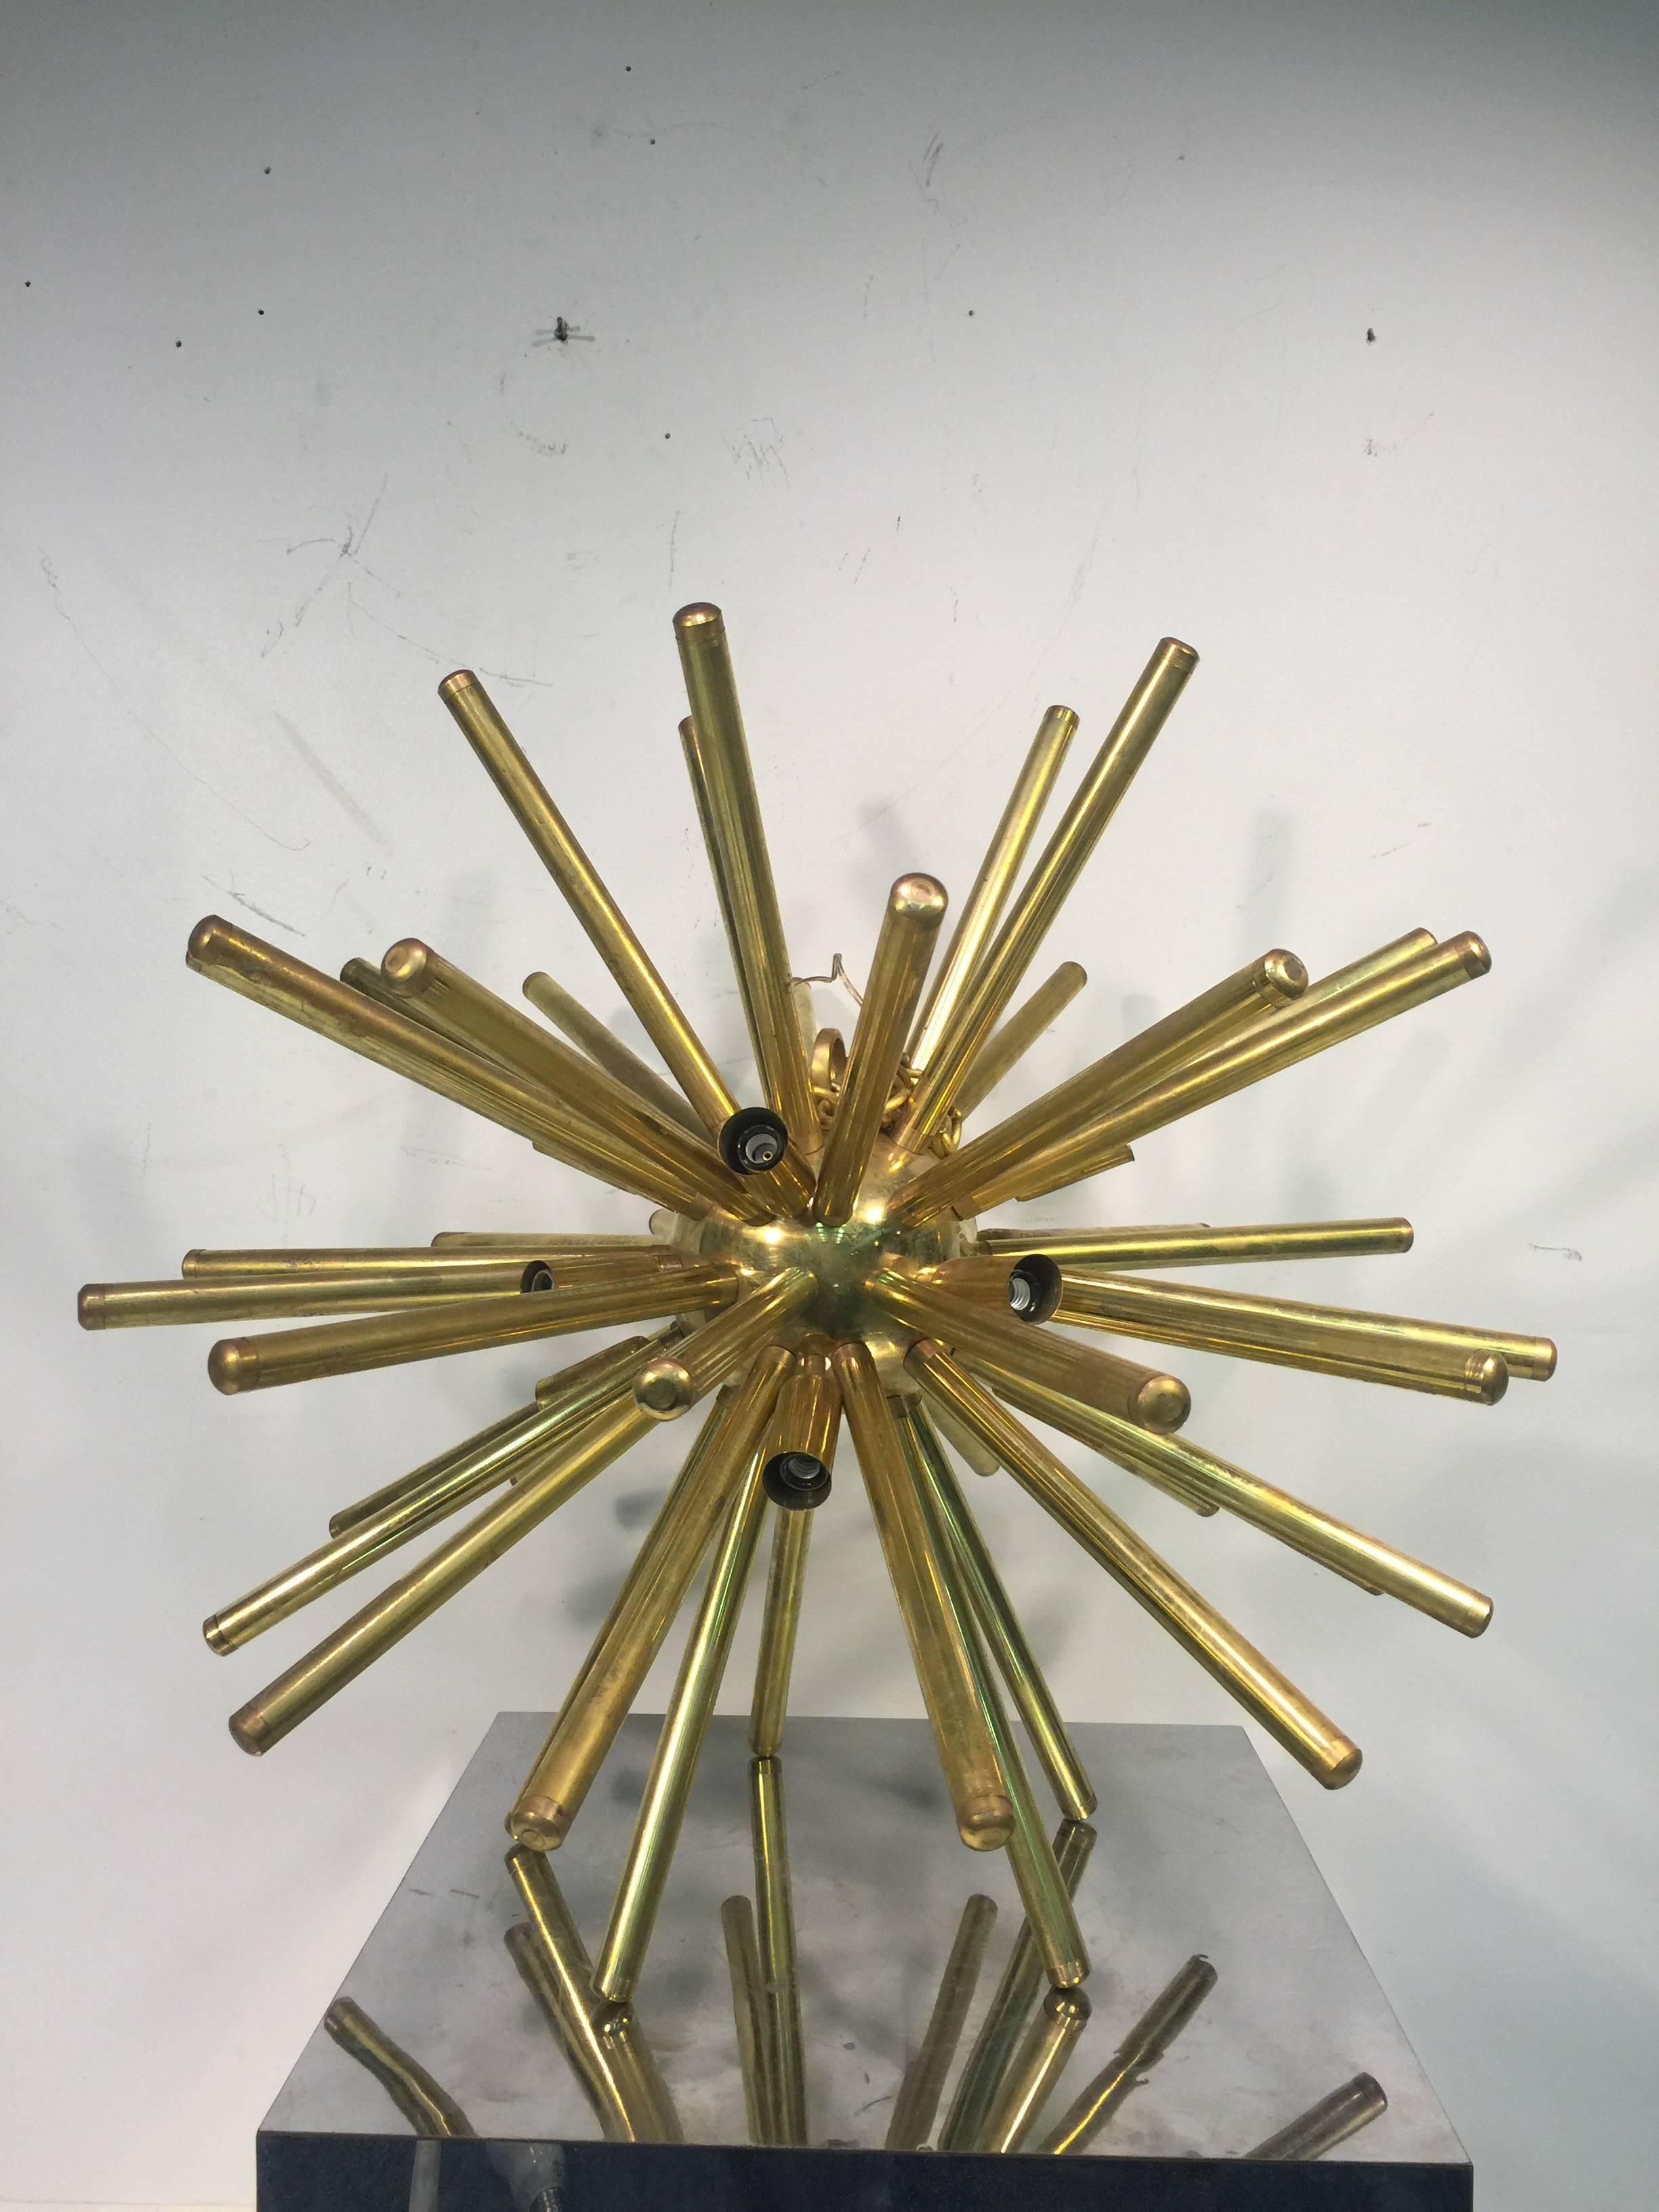 Stunning Pair of Sputnik Chandeliers with Substantial, Tubular, Brass Rods In Good Condition For Sale In Mount Penn, PA